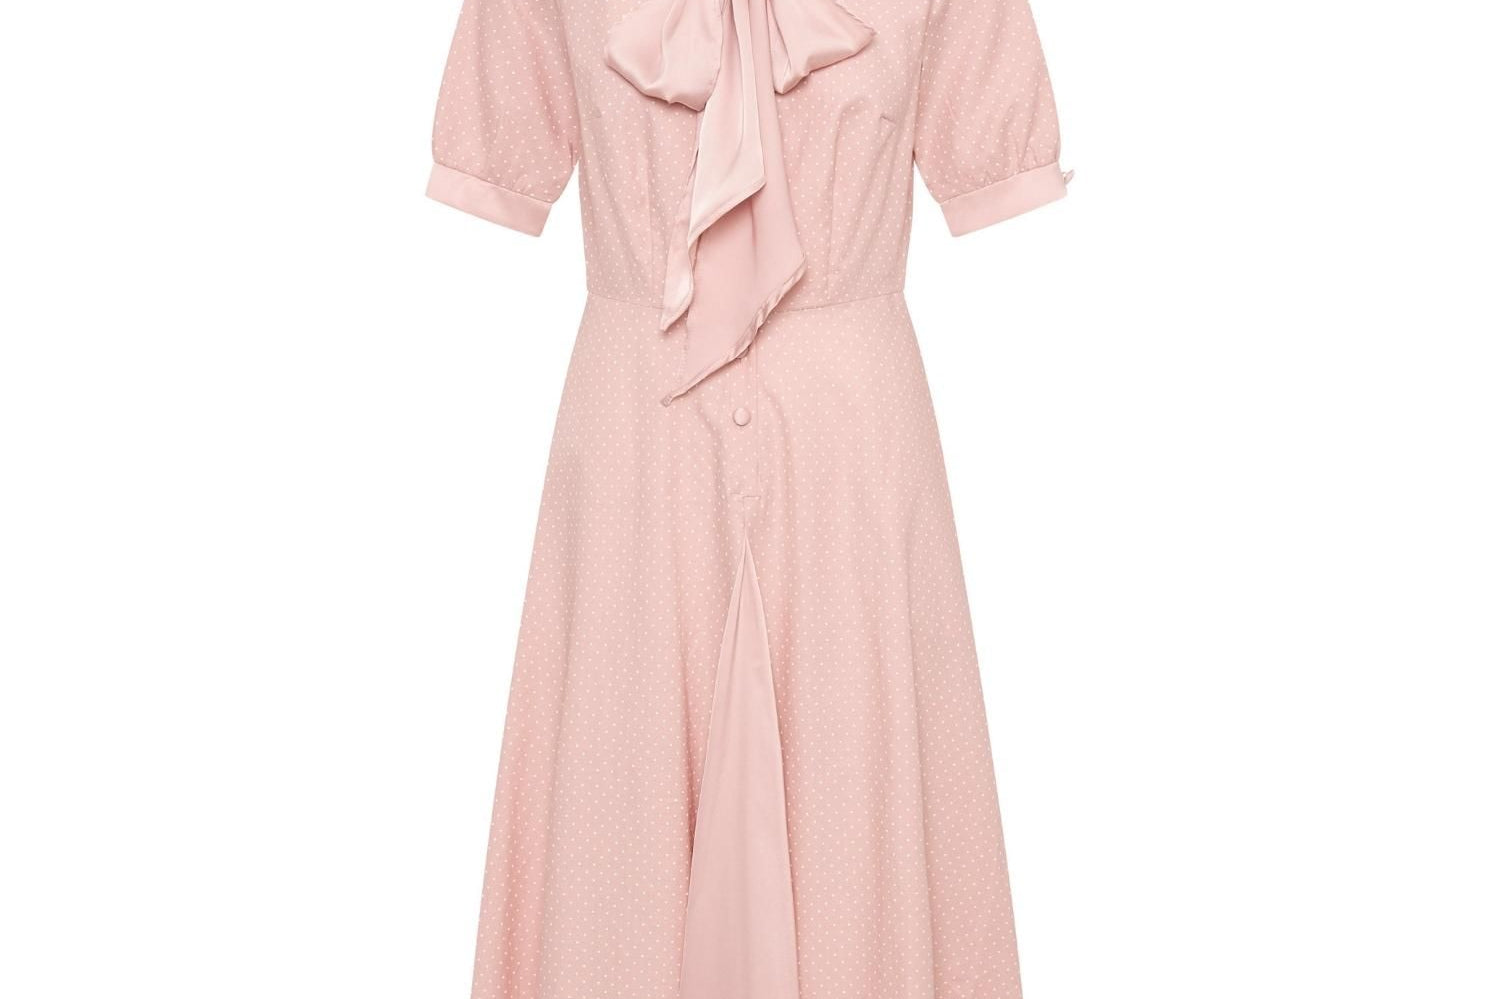 Stella Skipping Fit & Flare Dress with Bow collar in Dusty Pink Pin Spot